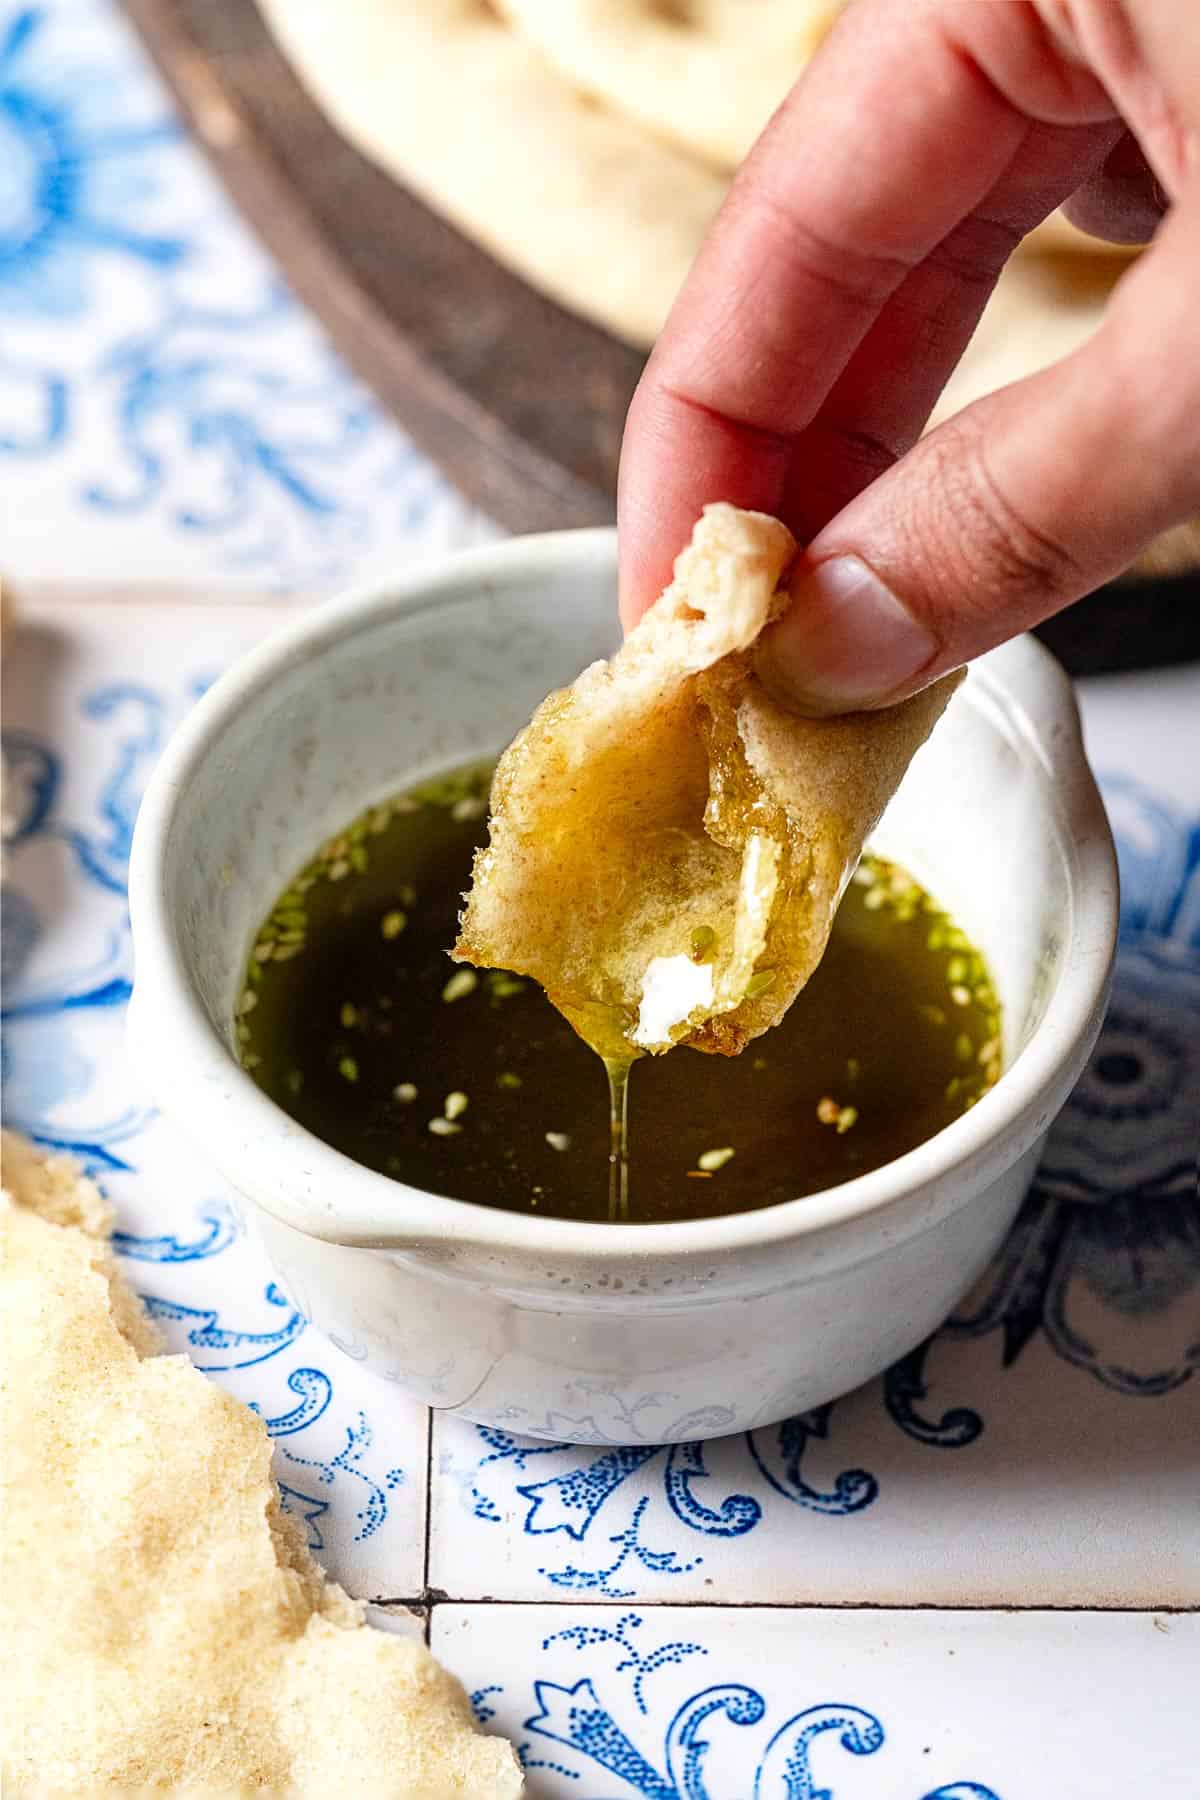 a piece of taboon flatbread being dipped into seasoned olive oil.